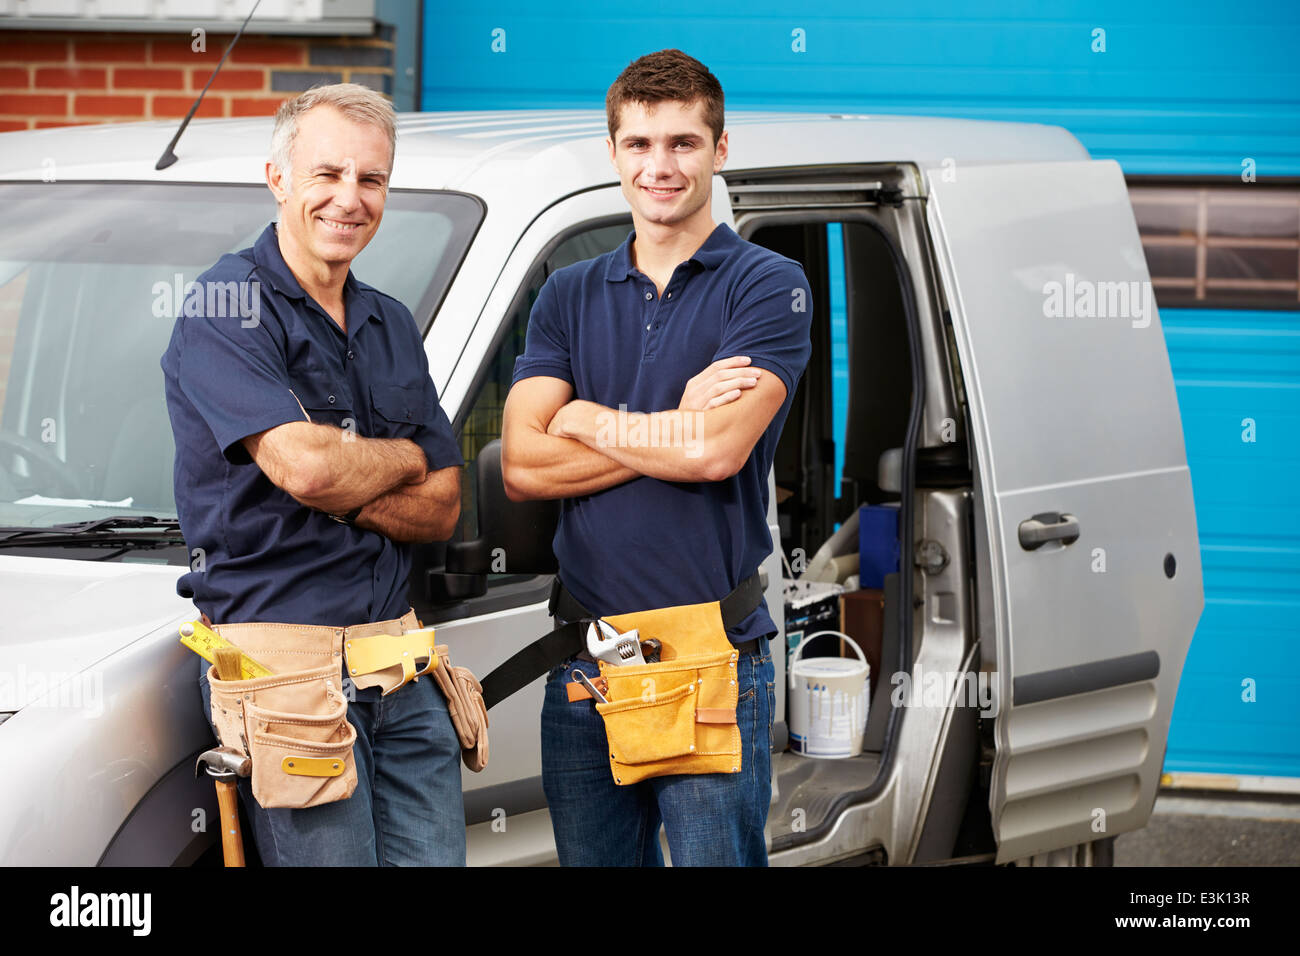 Workers In Family Business Standing Next To Van Stock Photo